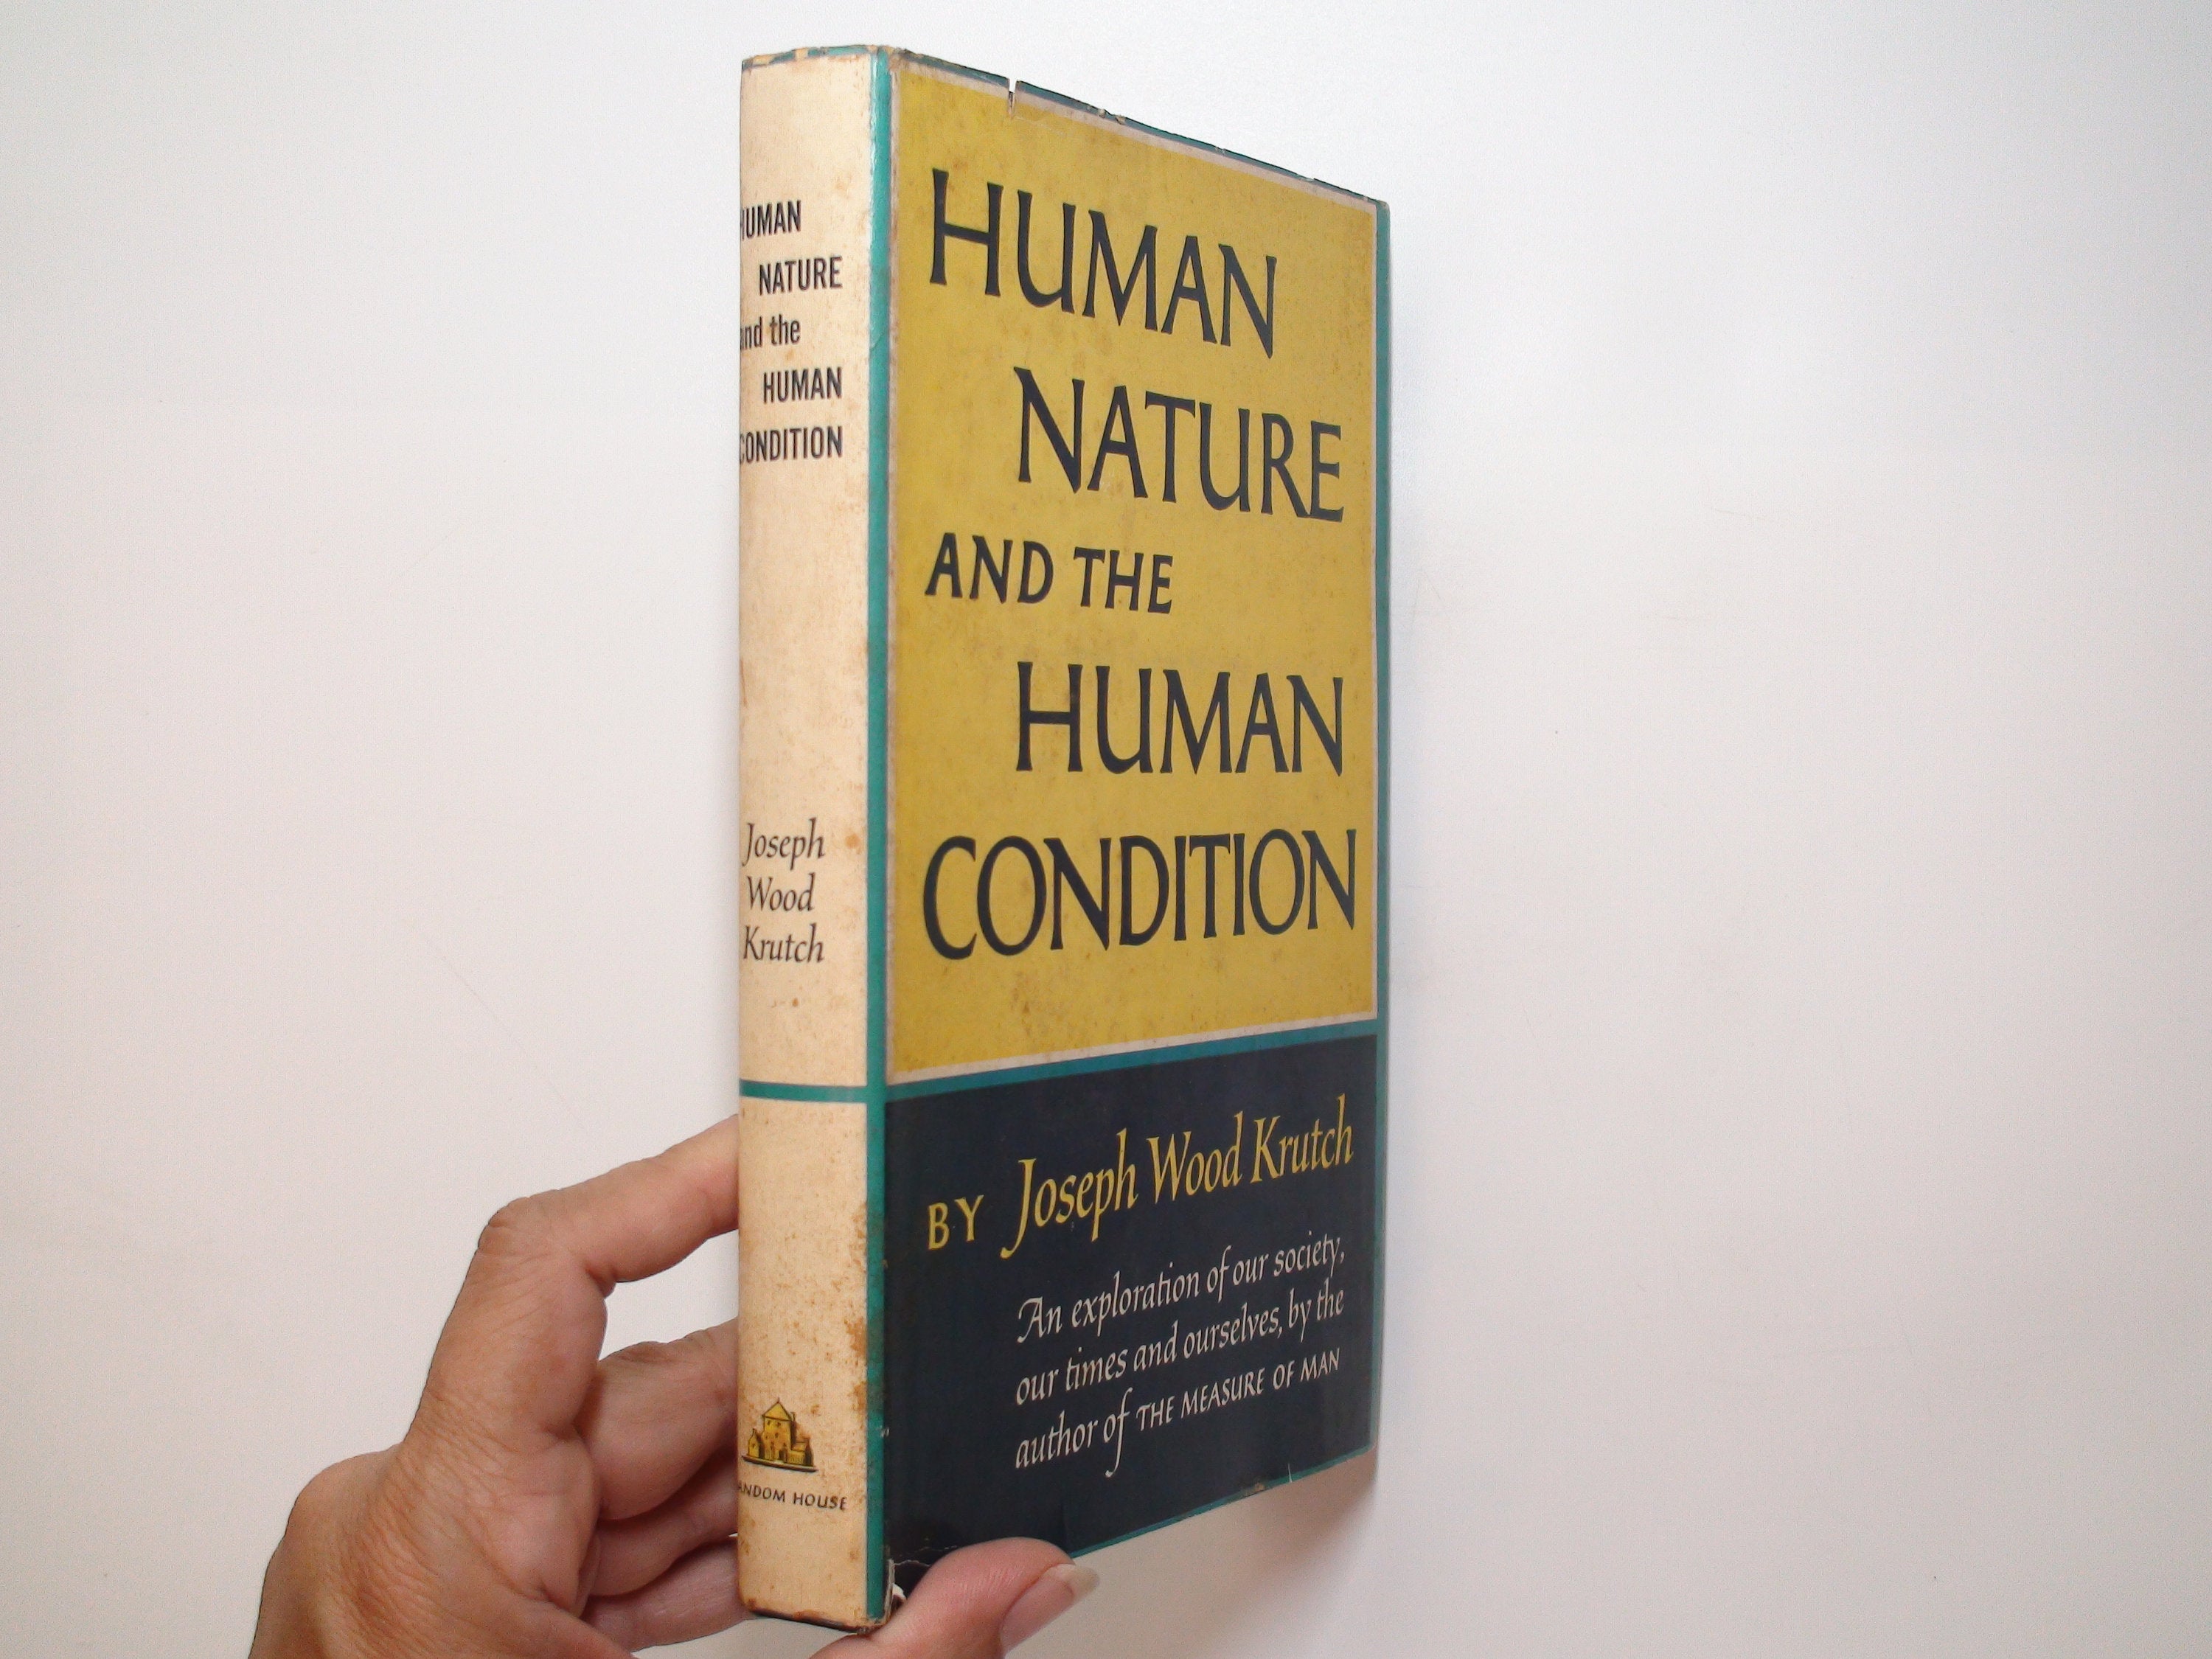 Human Nature and the Human Condition, by Joseph Wood Krutch, 1st Printing, 1959